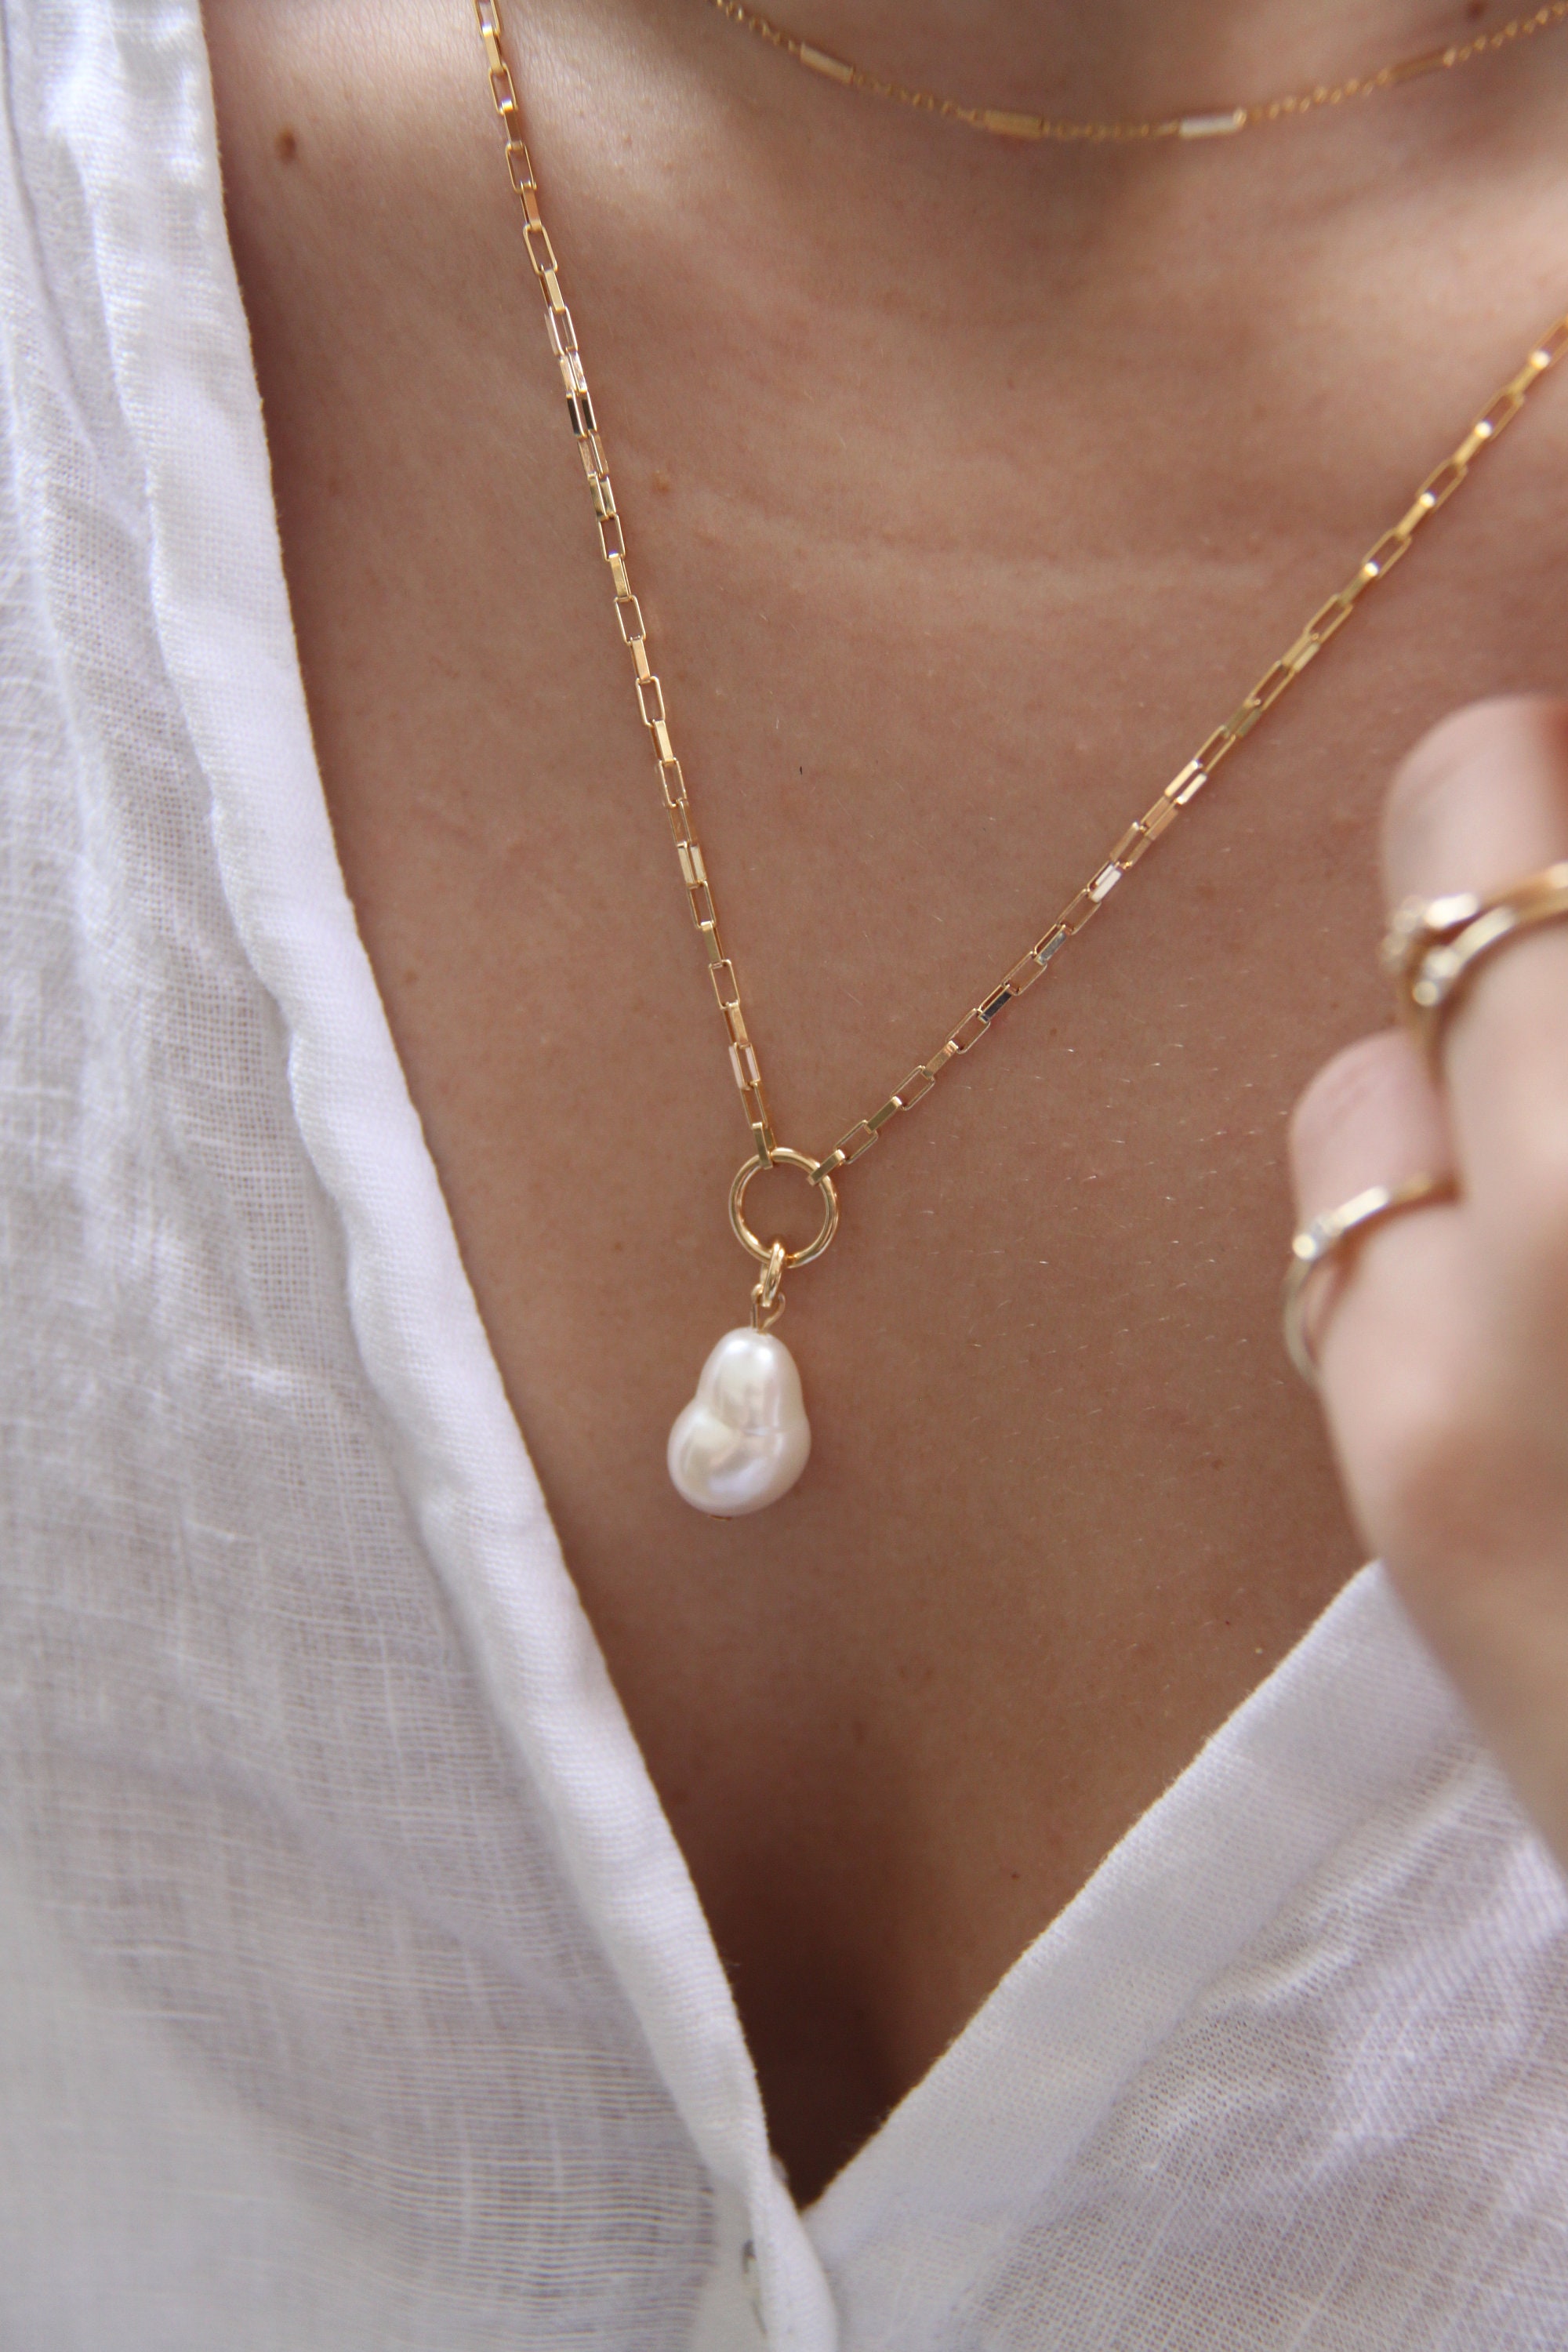 Gold Pendant Freshwater Pearls Necklace